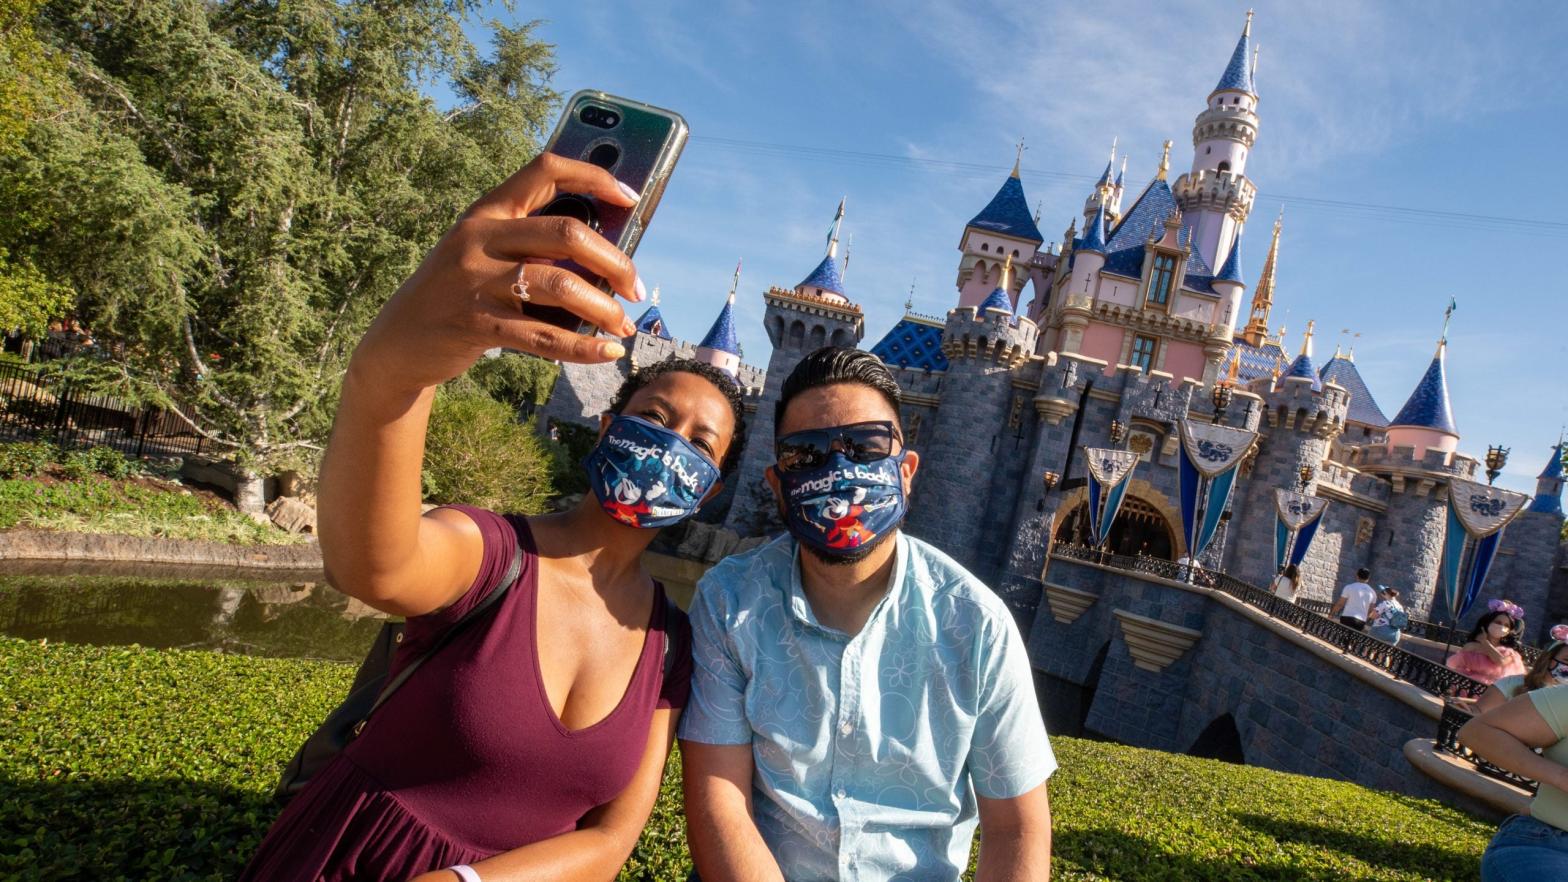 Guests at Disneyland on its reopening day, April 30. Masks will no longer be required starting June 15. (Photo: Disney Parks)